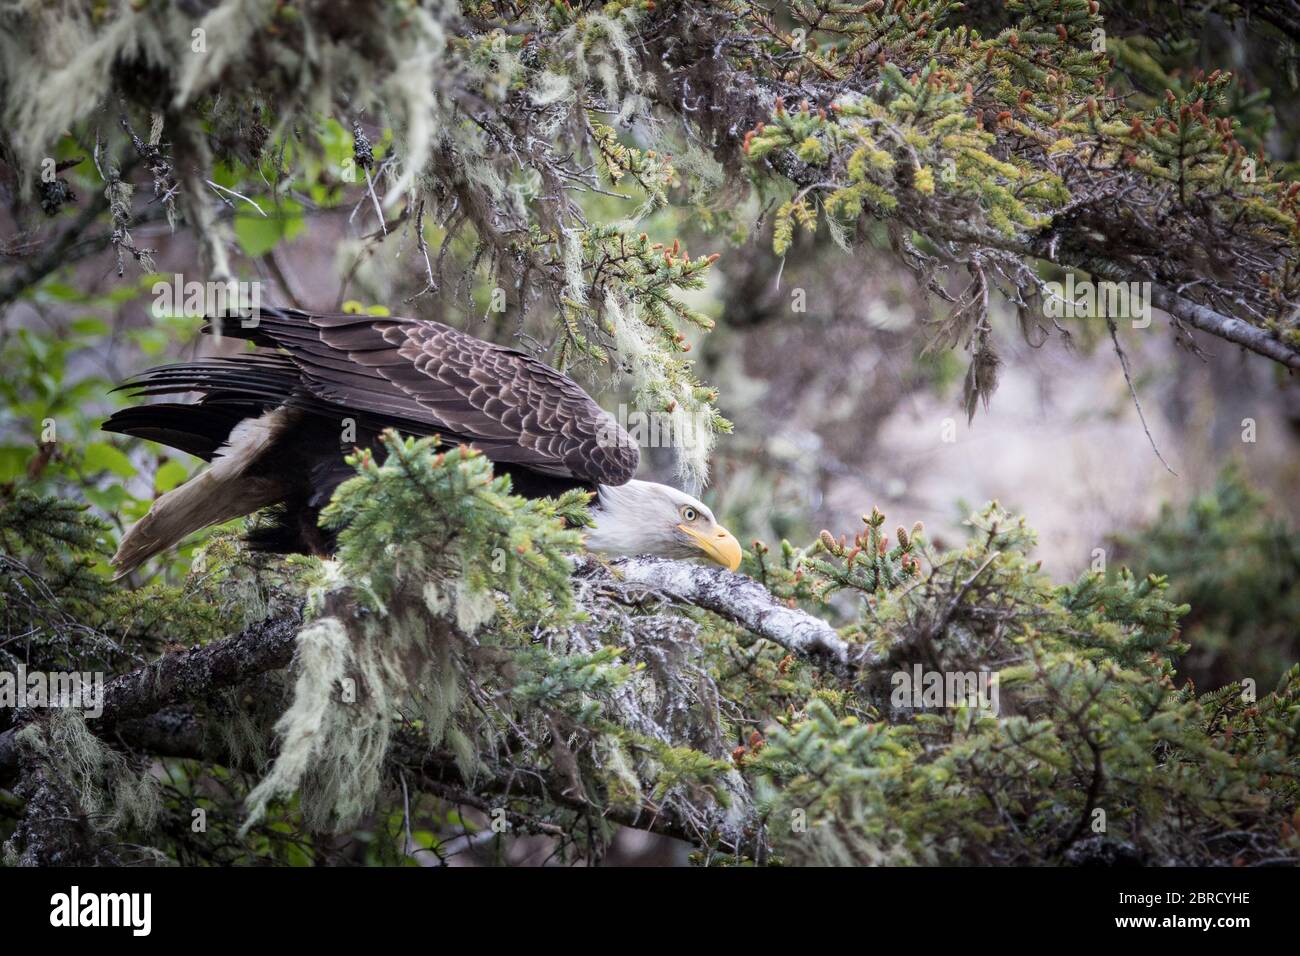 In Southeast Alaska, bald eagle, Haliaeetus leucocephalus, and other wildlife in Halleck Harbor appeal to adventureres on a small ship cruise. Stock Photo